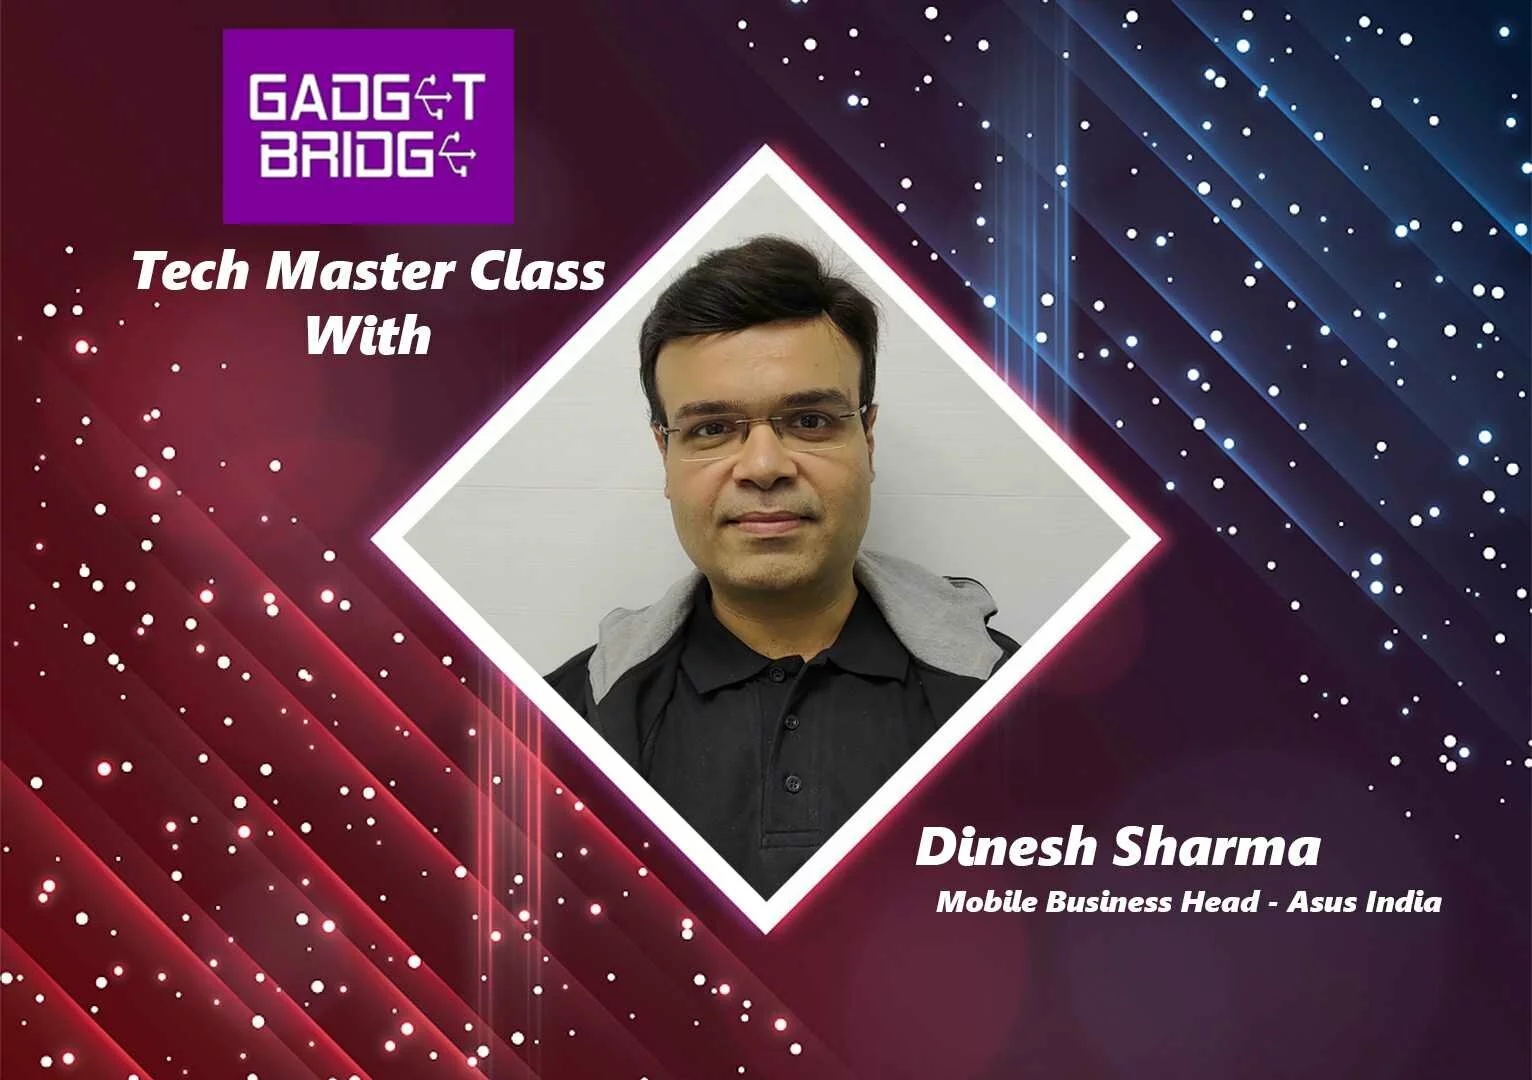 Exclusive - Tech Master Class Ep 1 with Dinesh Sharma from Asus India